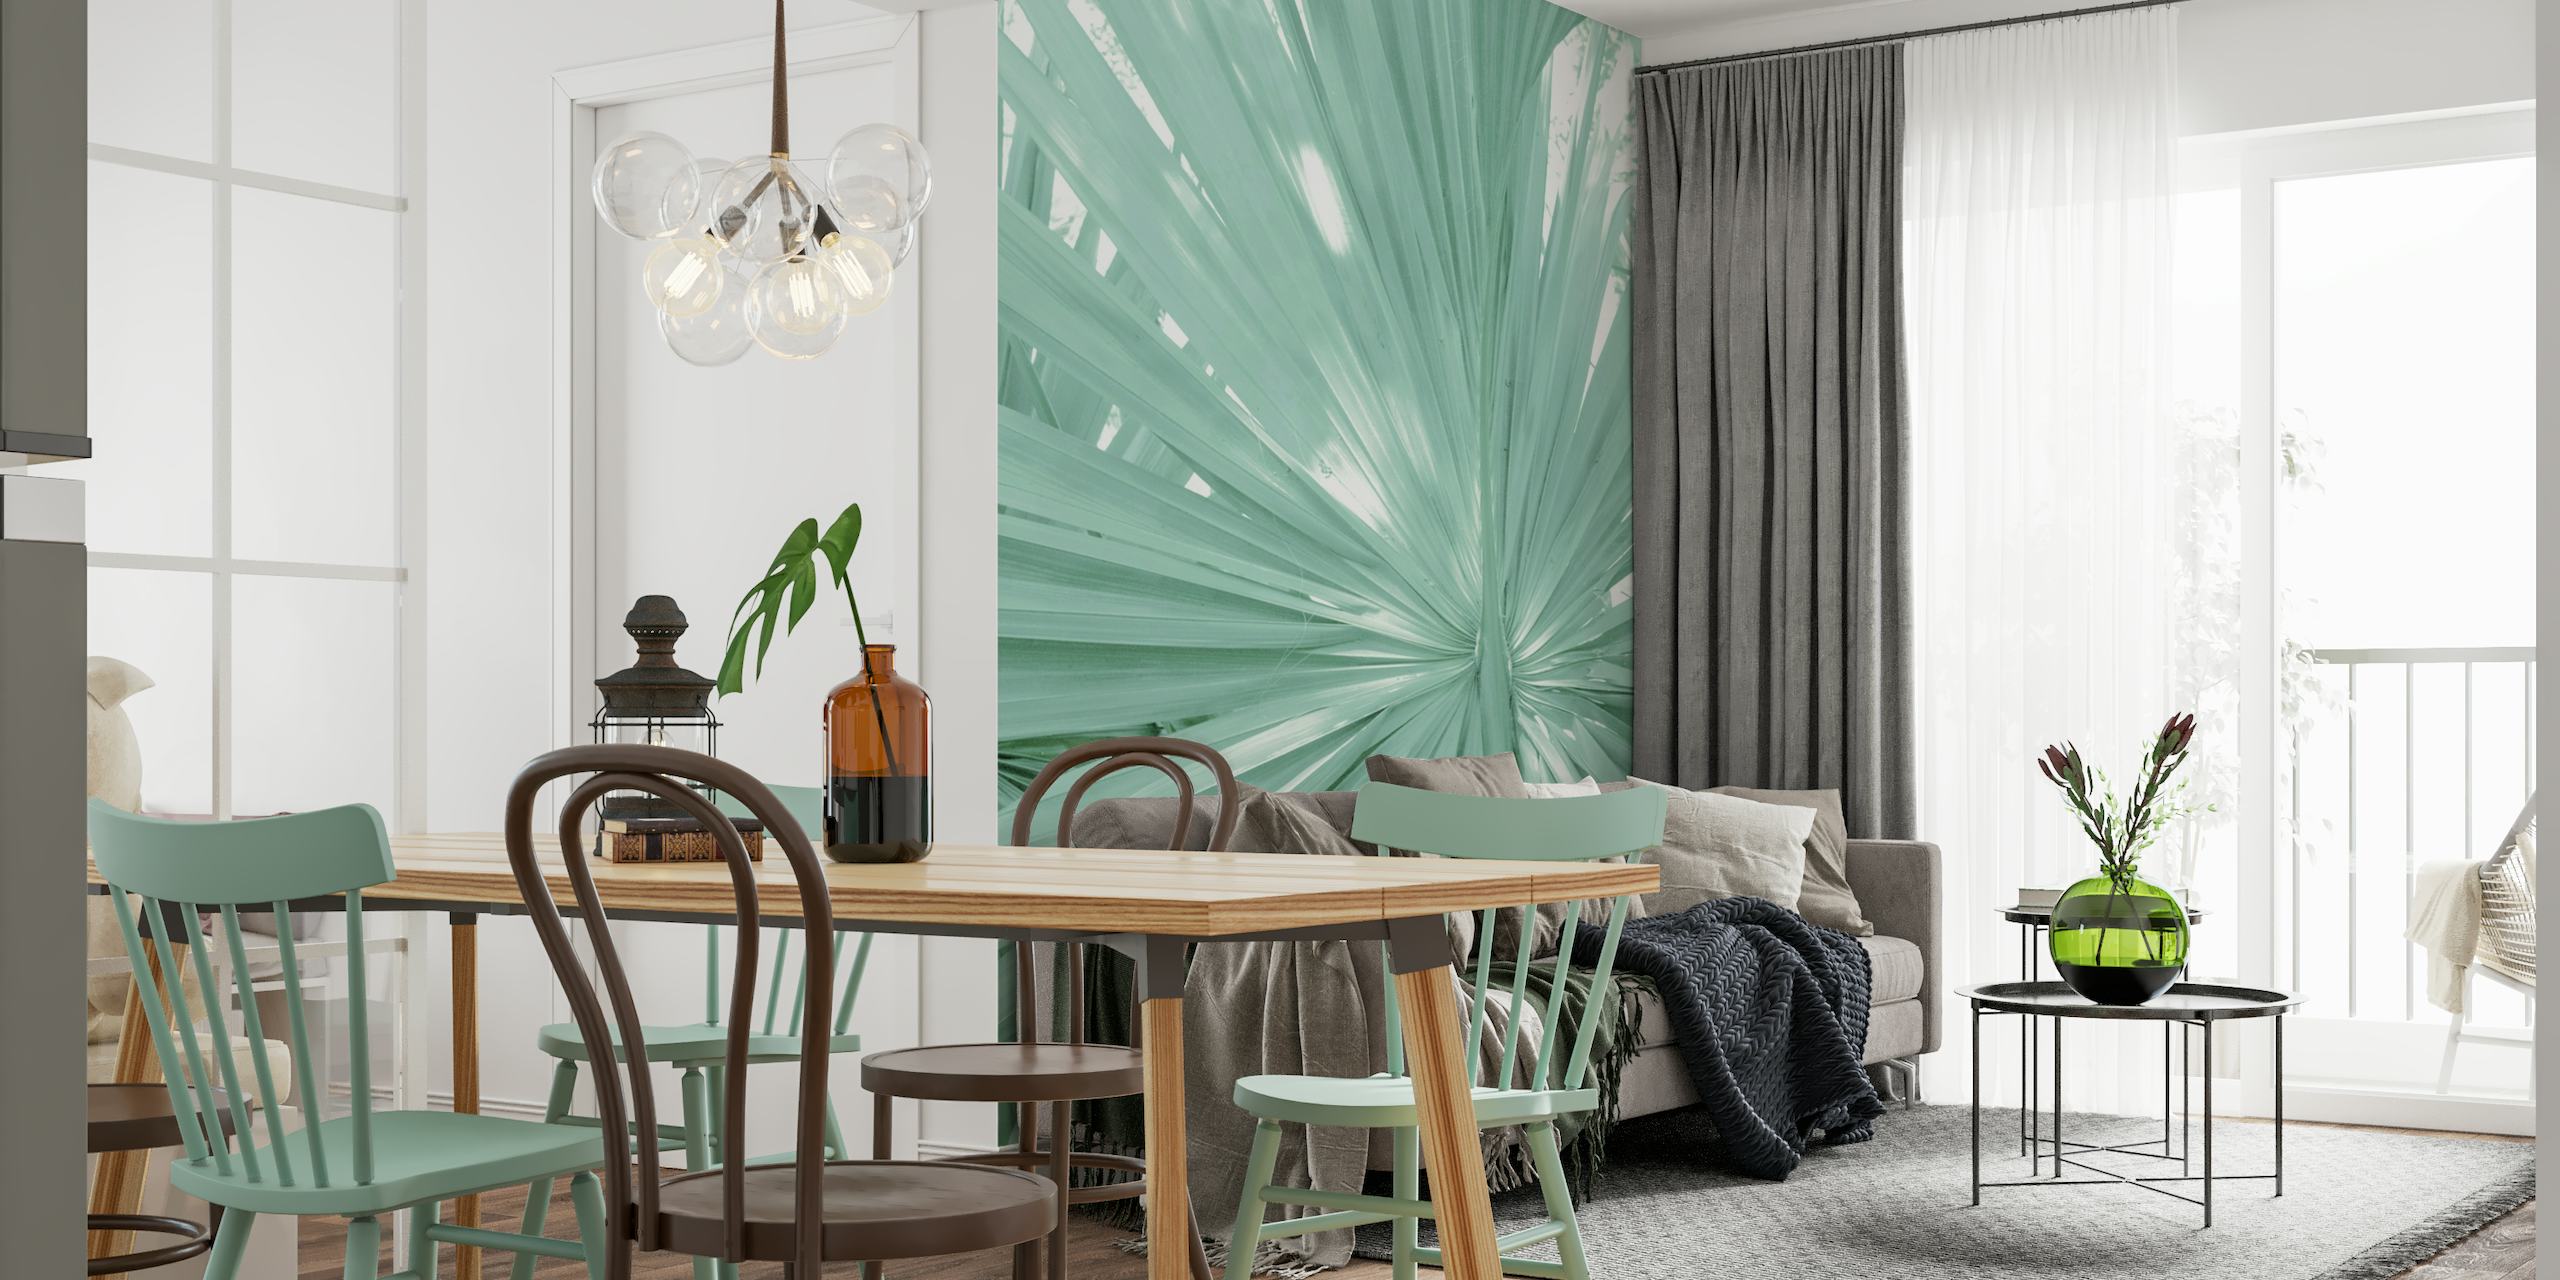 Tropical fan palm leaf pattern wall mural for interior decor